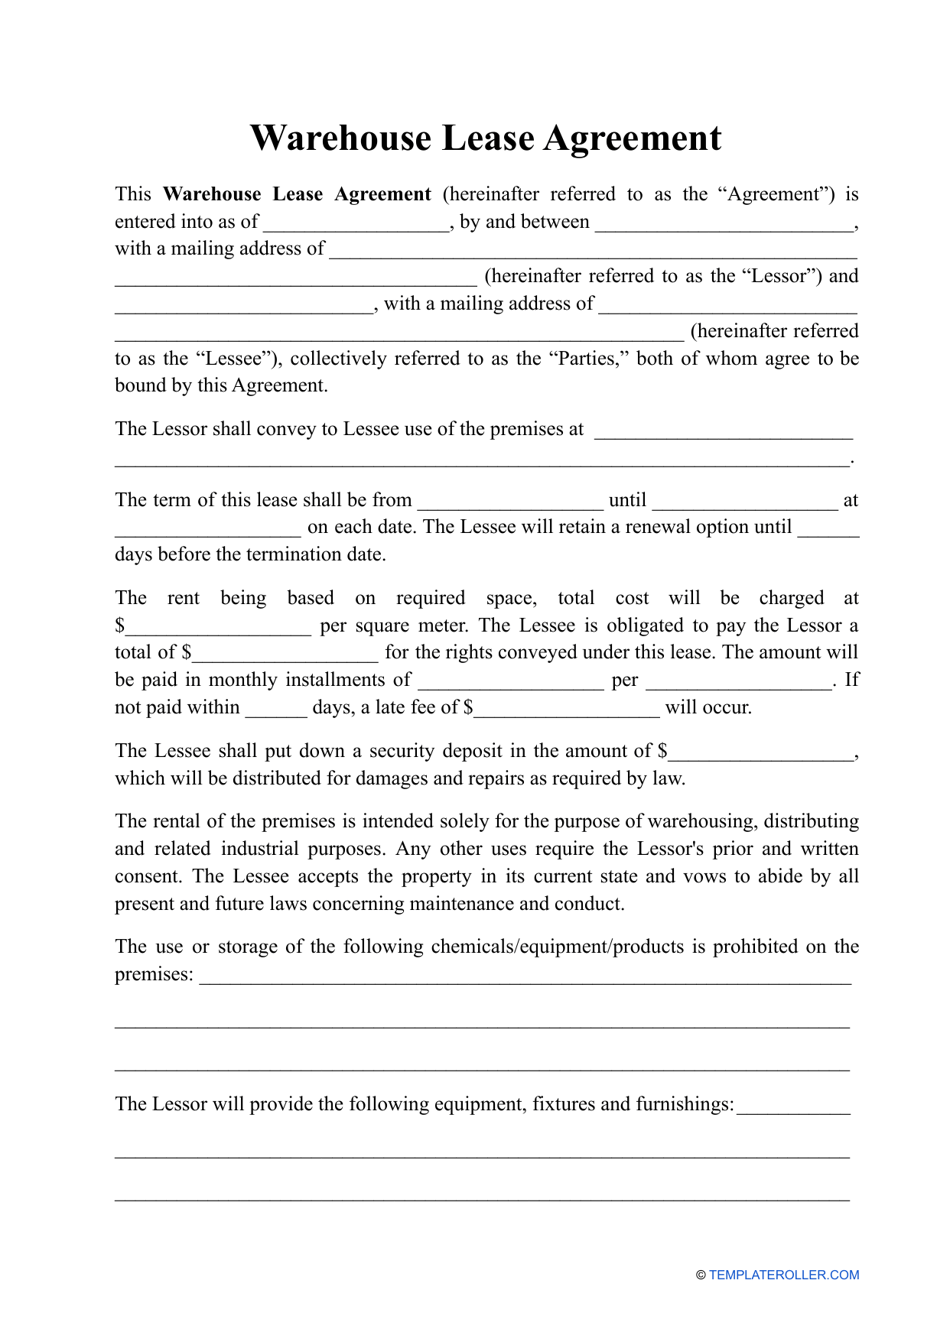 Warehouse Lease Agreement Template, Page 1